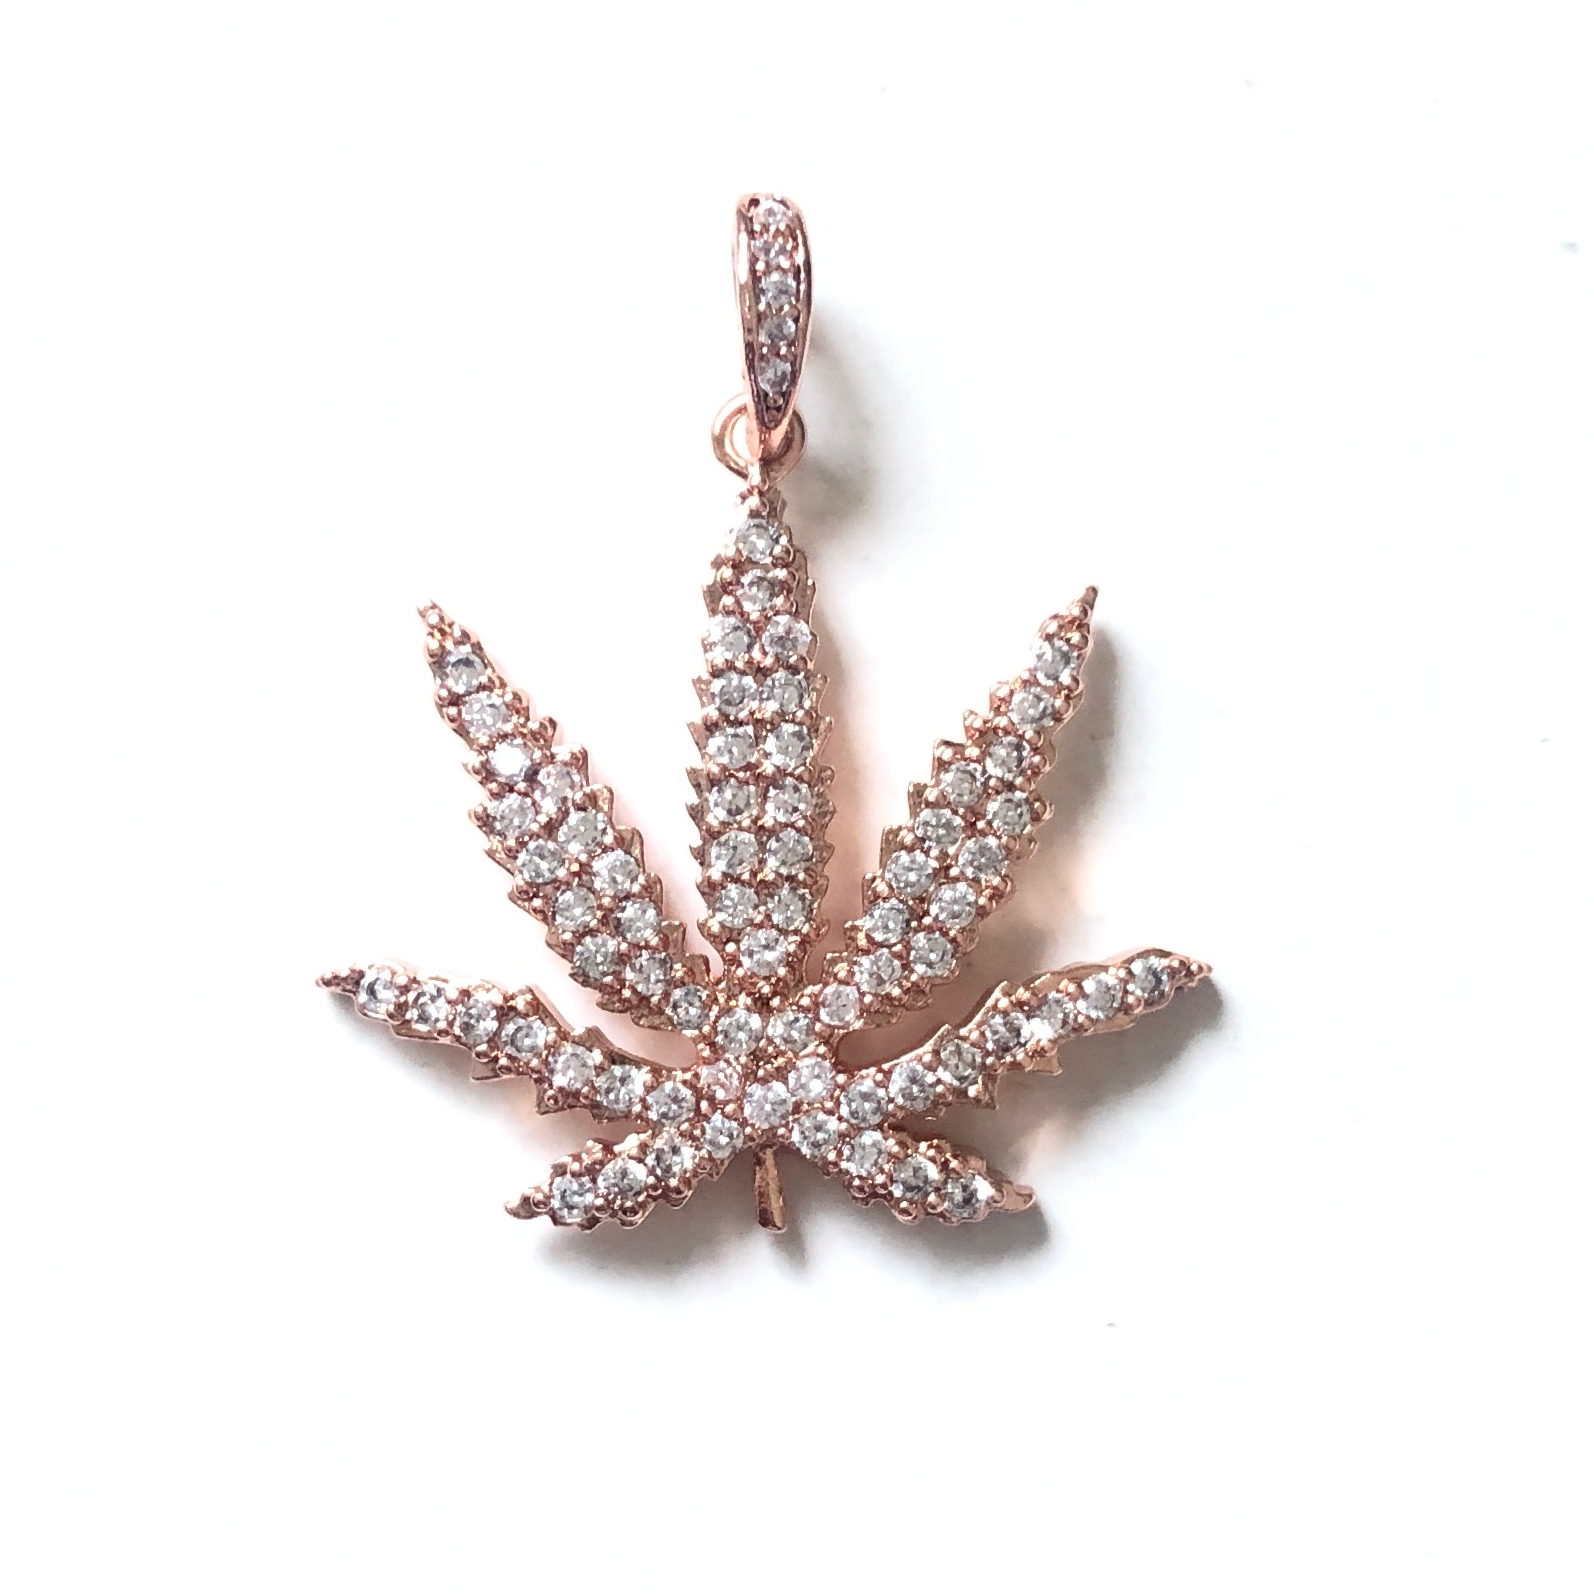 10pcs/lot 25*21.5mm CZ Paved Cannabis Leaf Plant Charms Rose Gold CZ Paved Charms Flowers Charms Beads Beyond